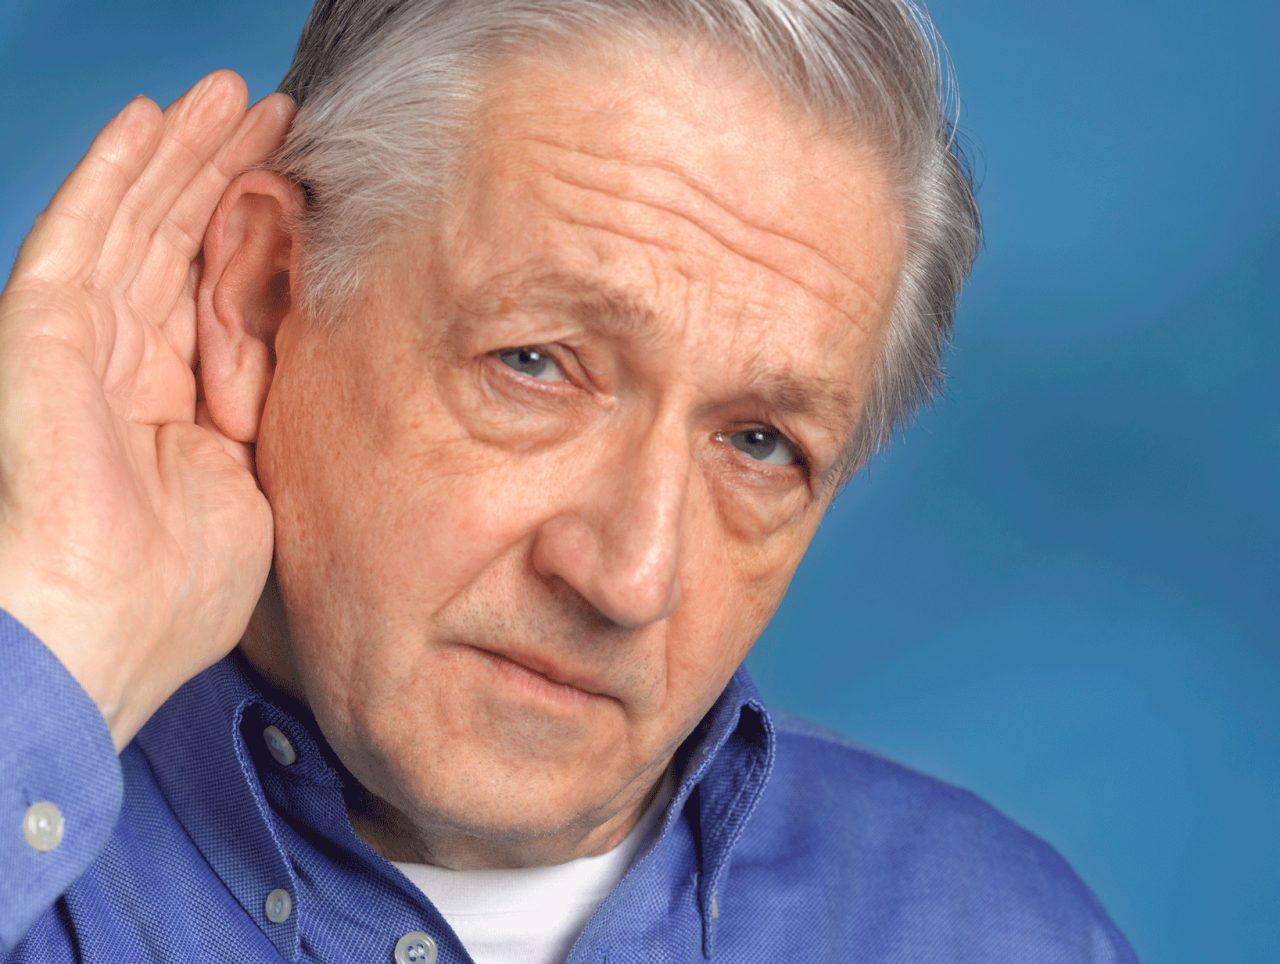 What Is Hidden Hearing Loss?